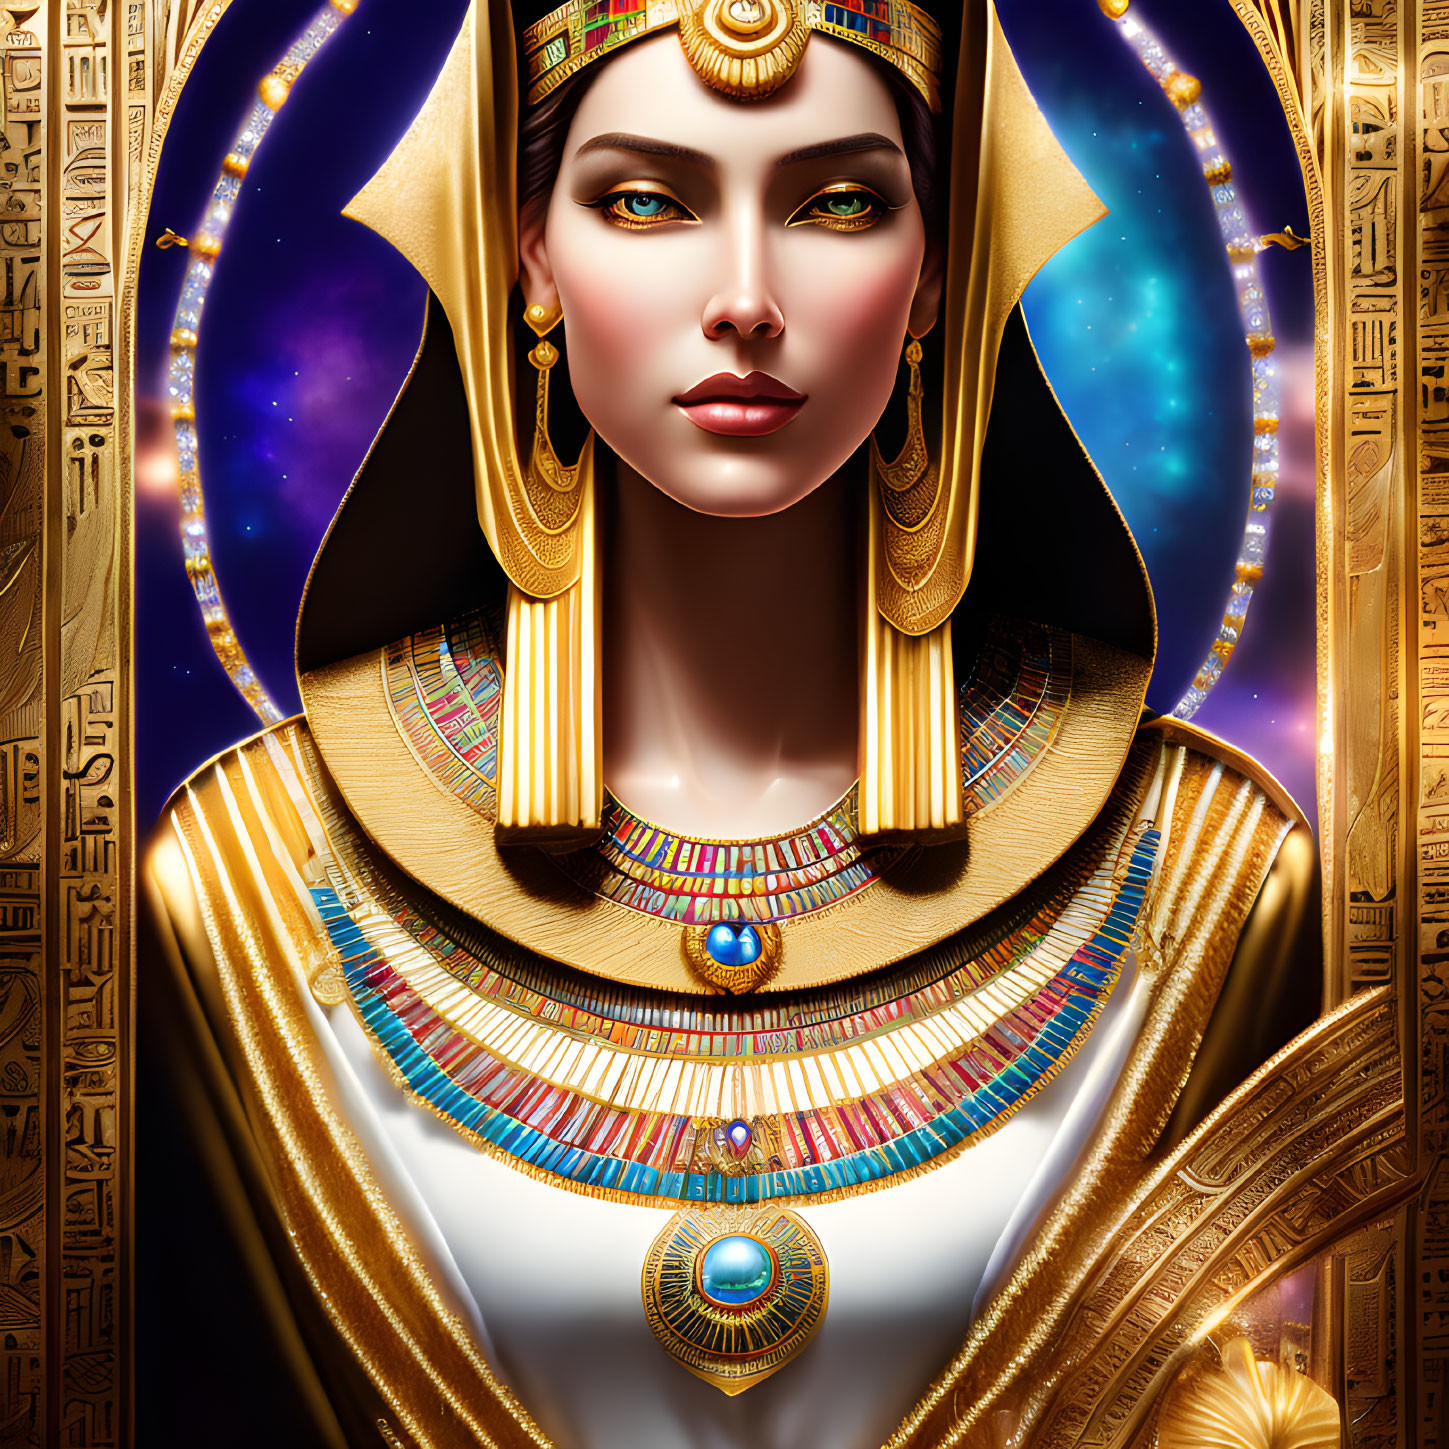 Stylized portrait of woman with ancient Egyptian royal attire and cosmic motifs